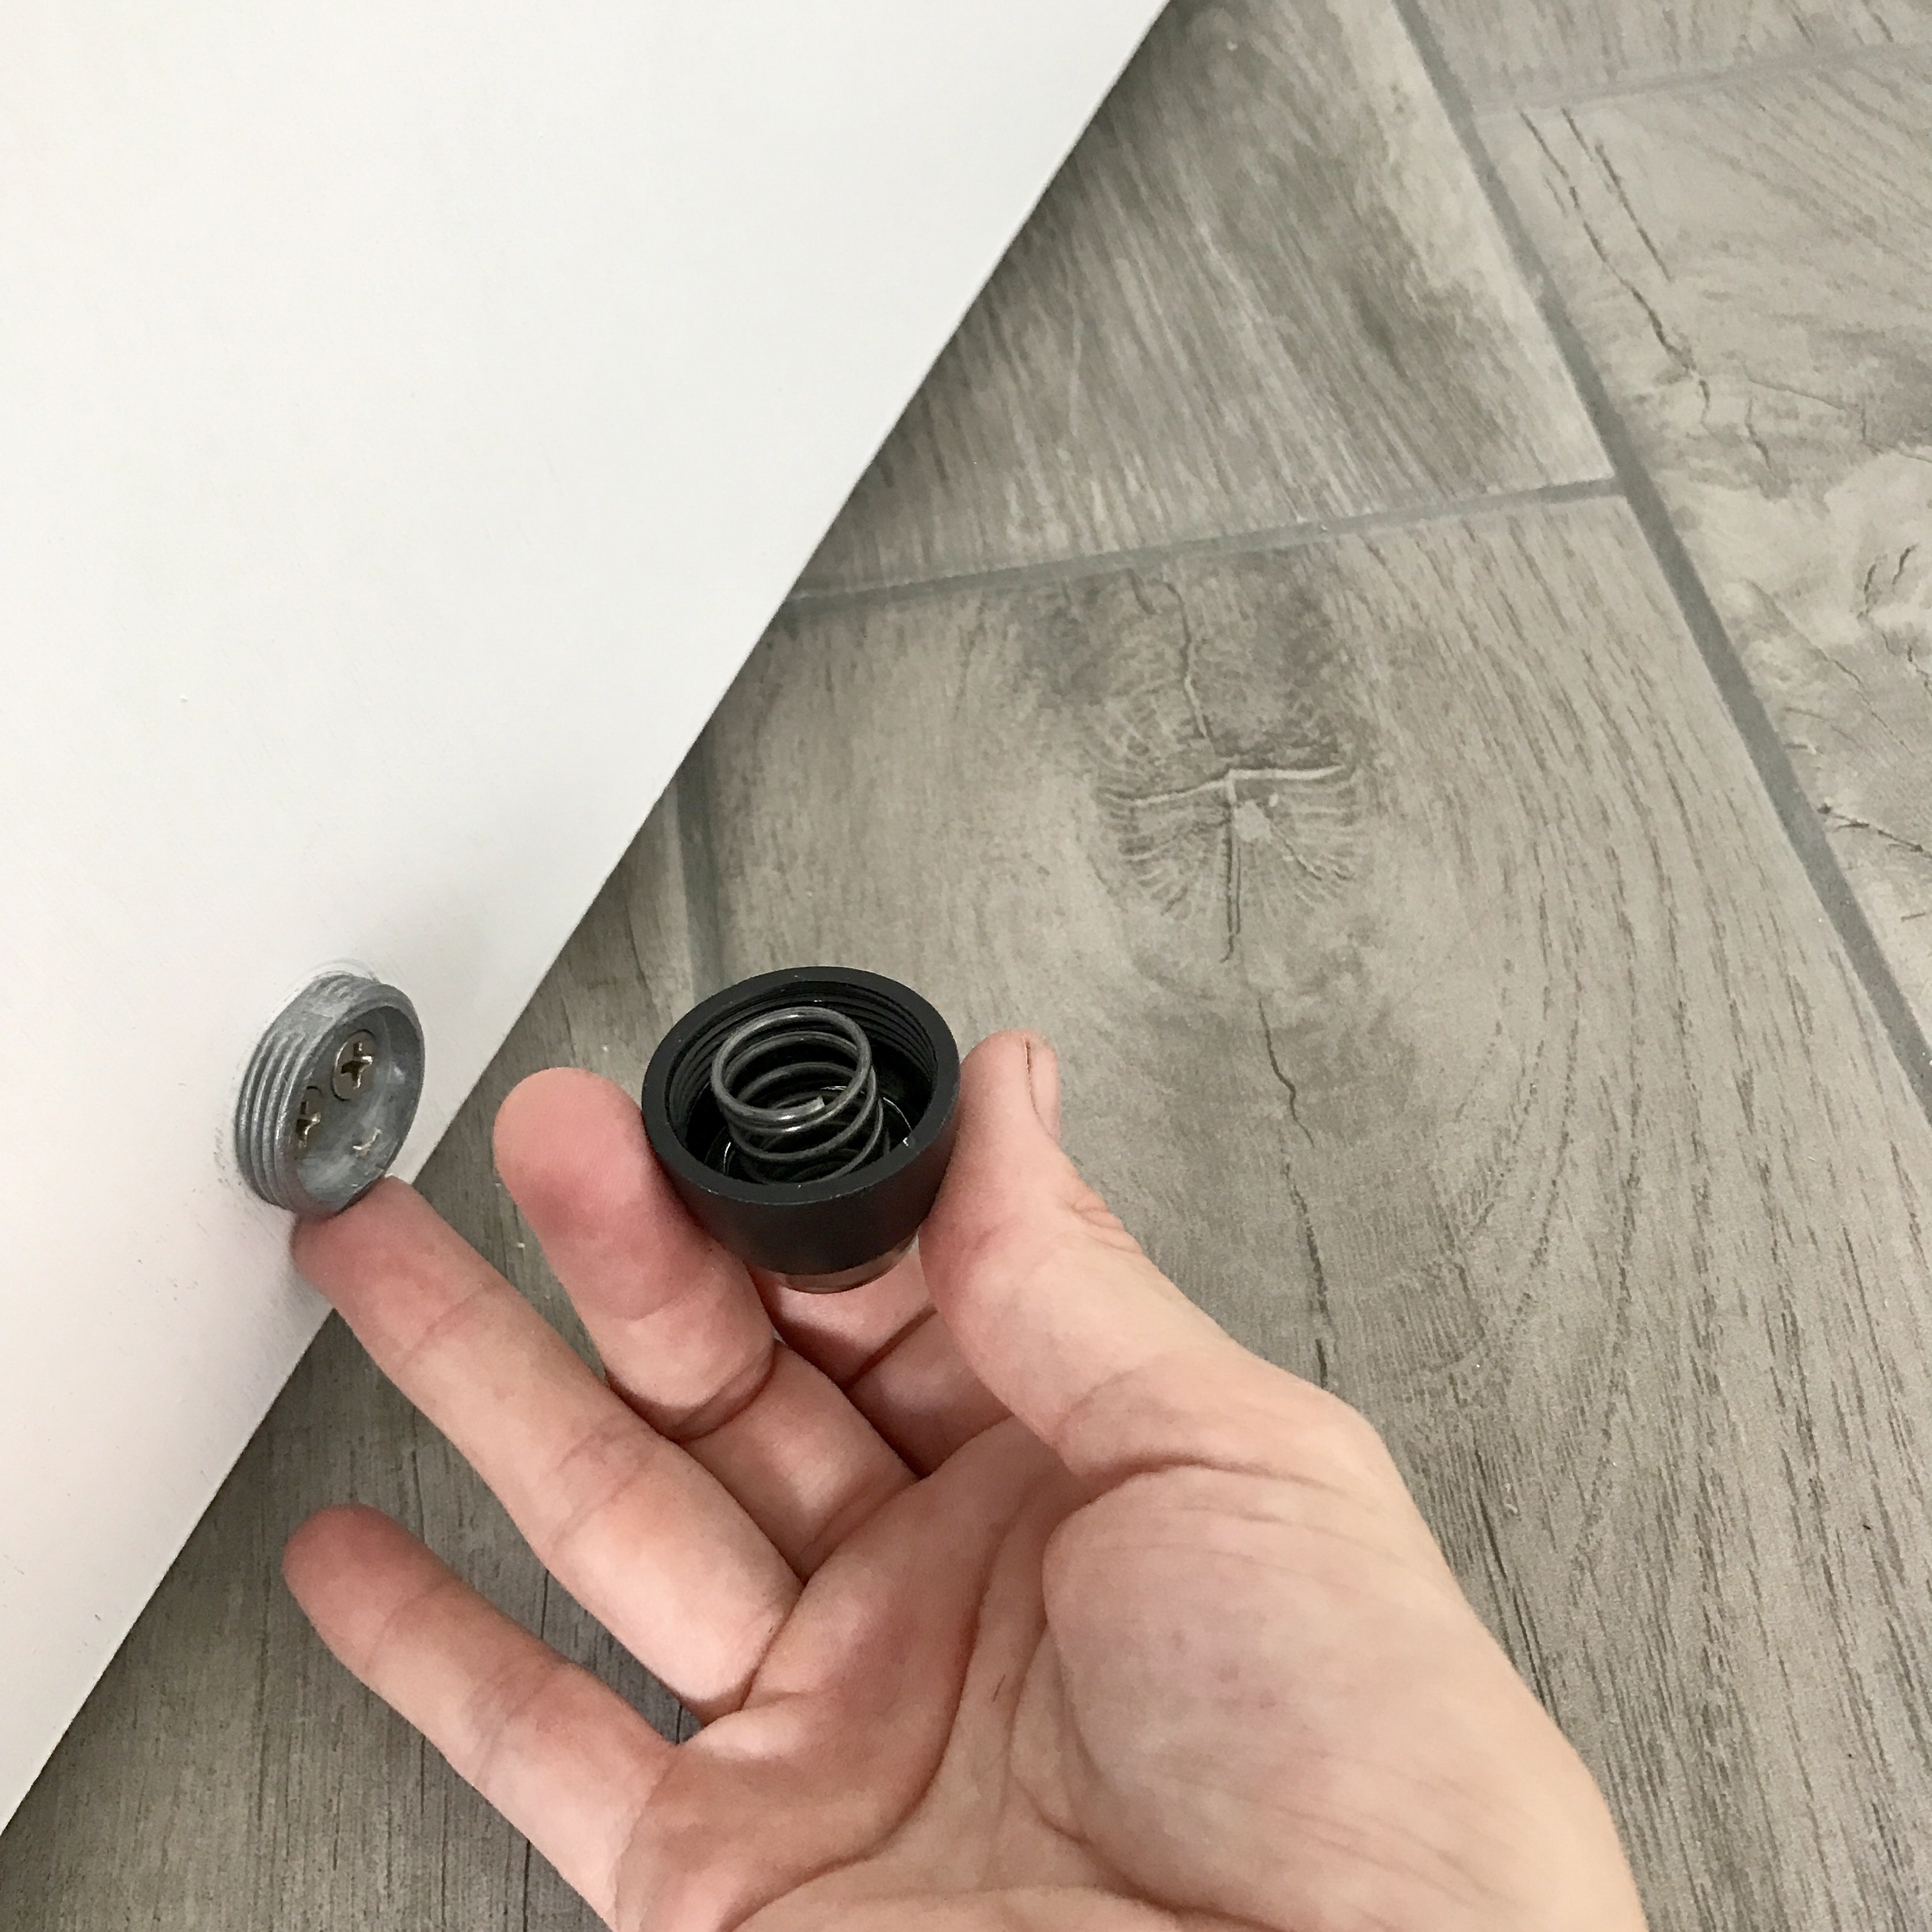 Installing A Magnetic Doorstop How To